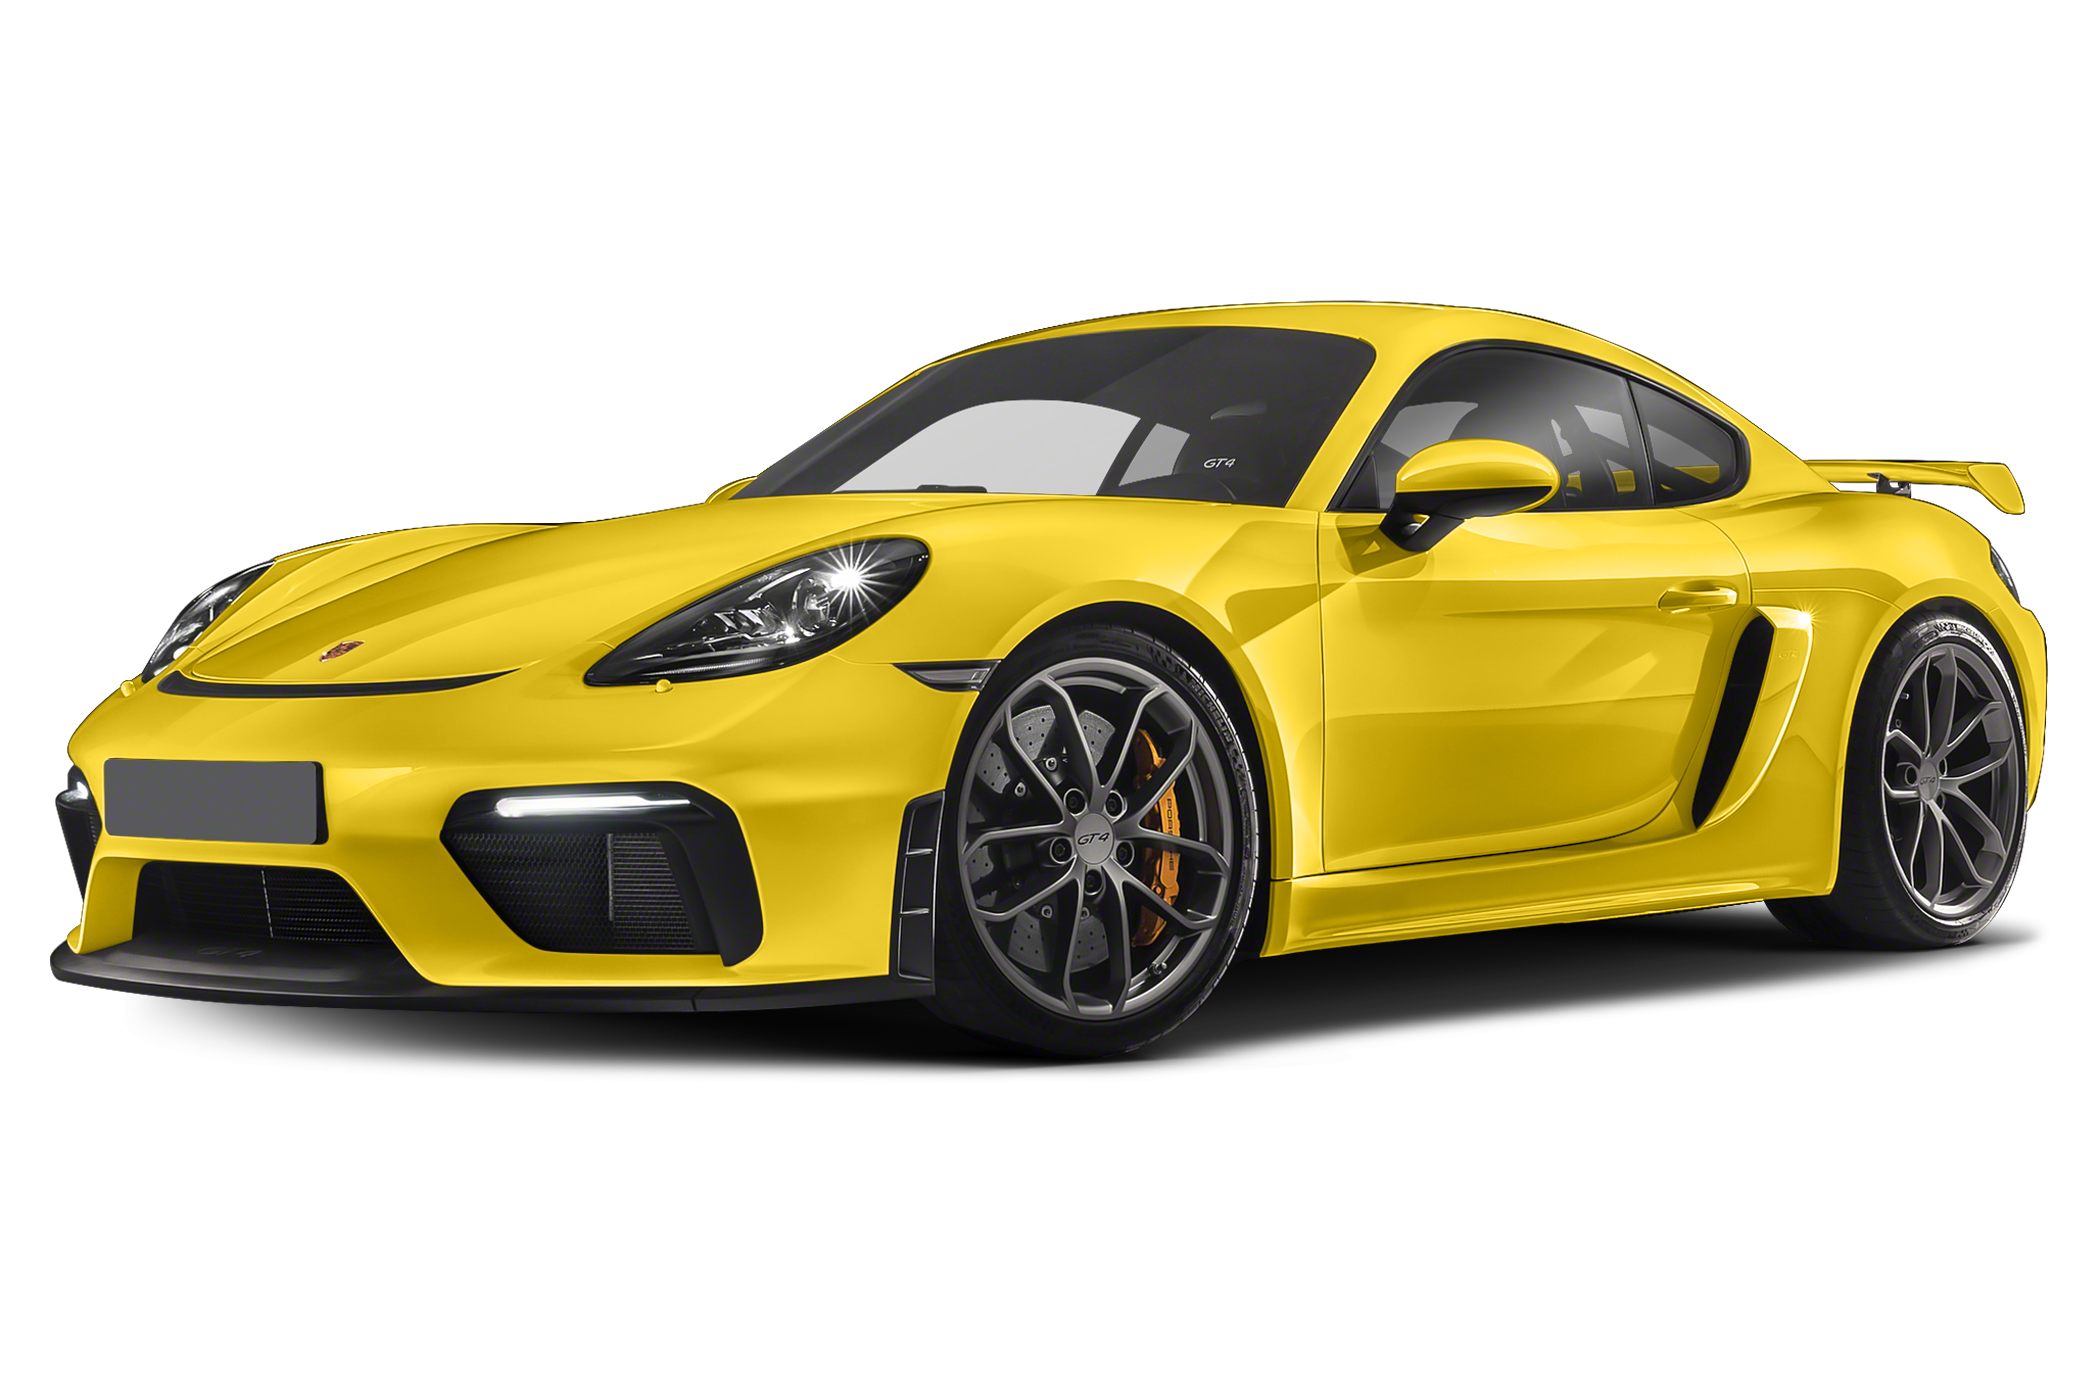 21 Porsche 718 Cayman Gts 4 0 2dr Rear Wheel Drive Coupe Specs And Prices